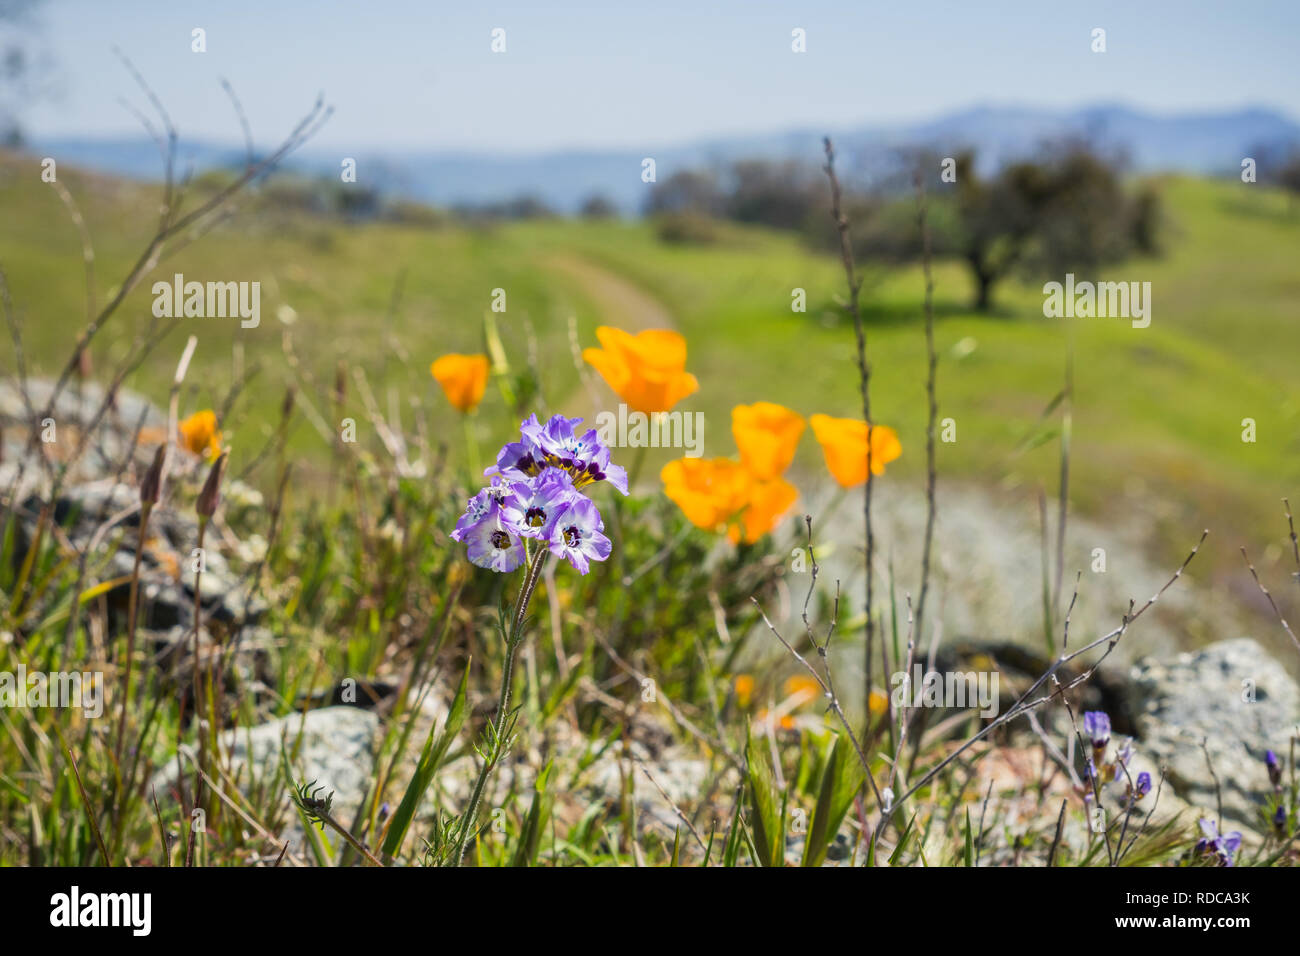 Close up of Gilia wildflowers, blurred poppies in the background, Henry W. Coe State Park, California; selective focus Stock Photo